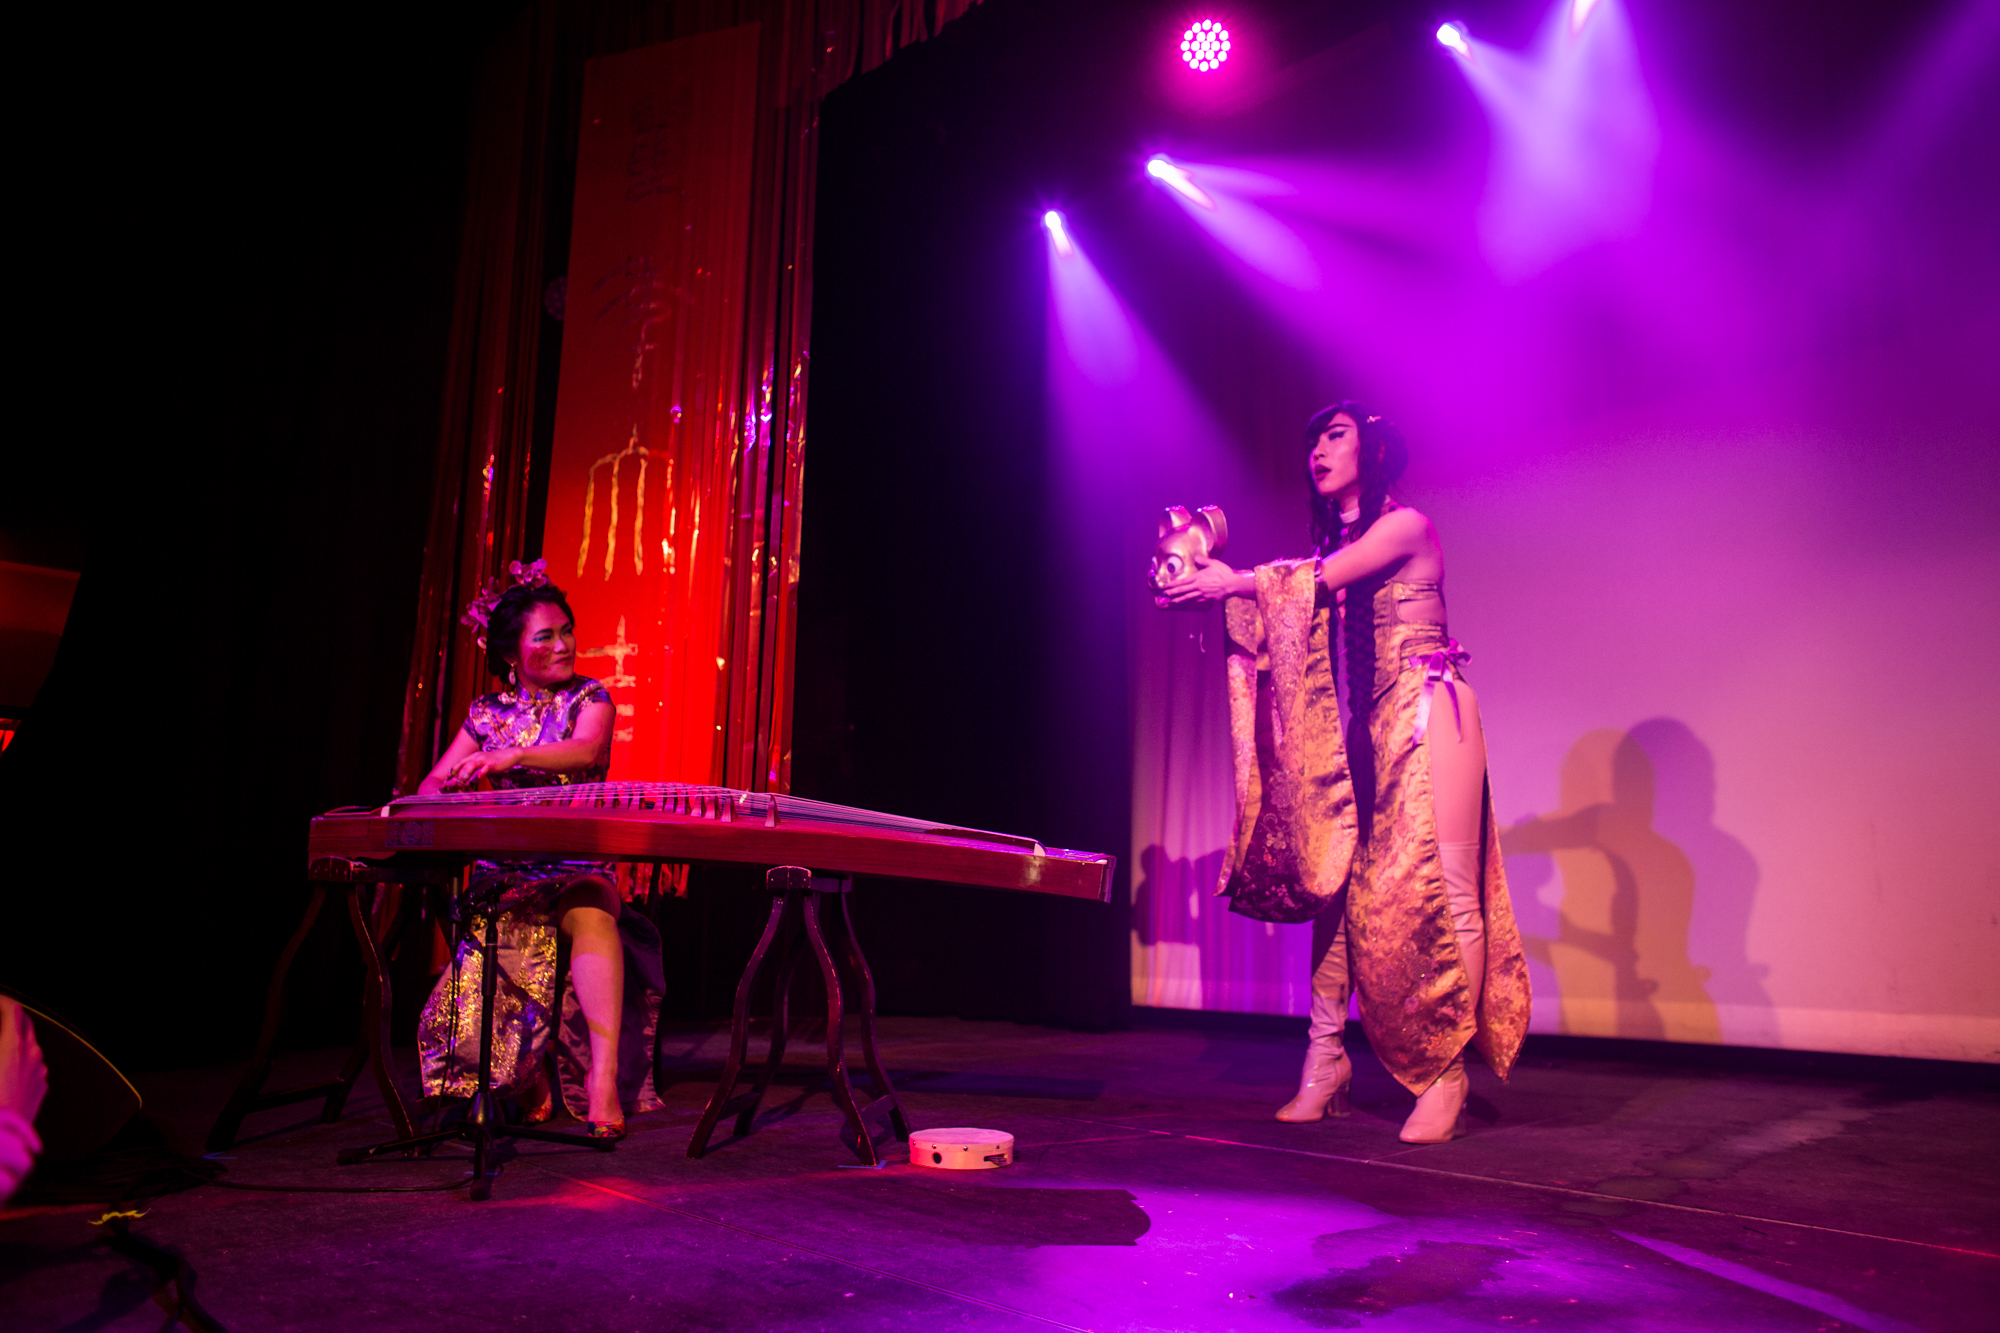 Clae and Dynasty performing on stage at Elsewhere in Brooklyn. They are lit by purple and red lights. Clae is in a purple qipao, performing on the guzheng looking at Dynasty who is holding a rat mask and in a gold costume.